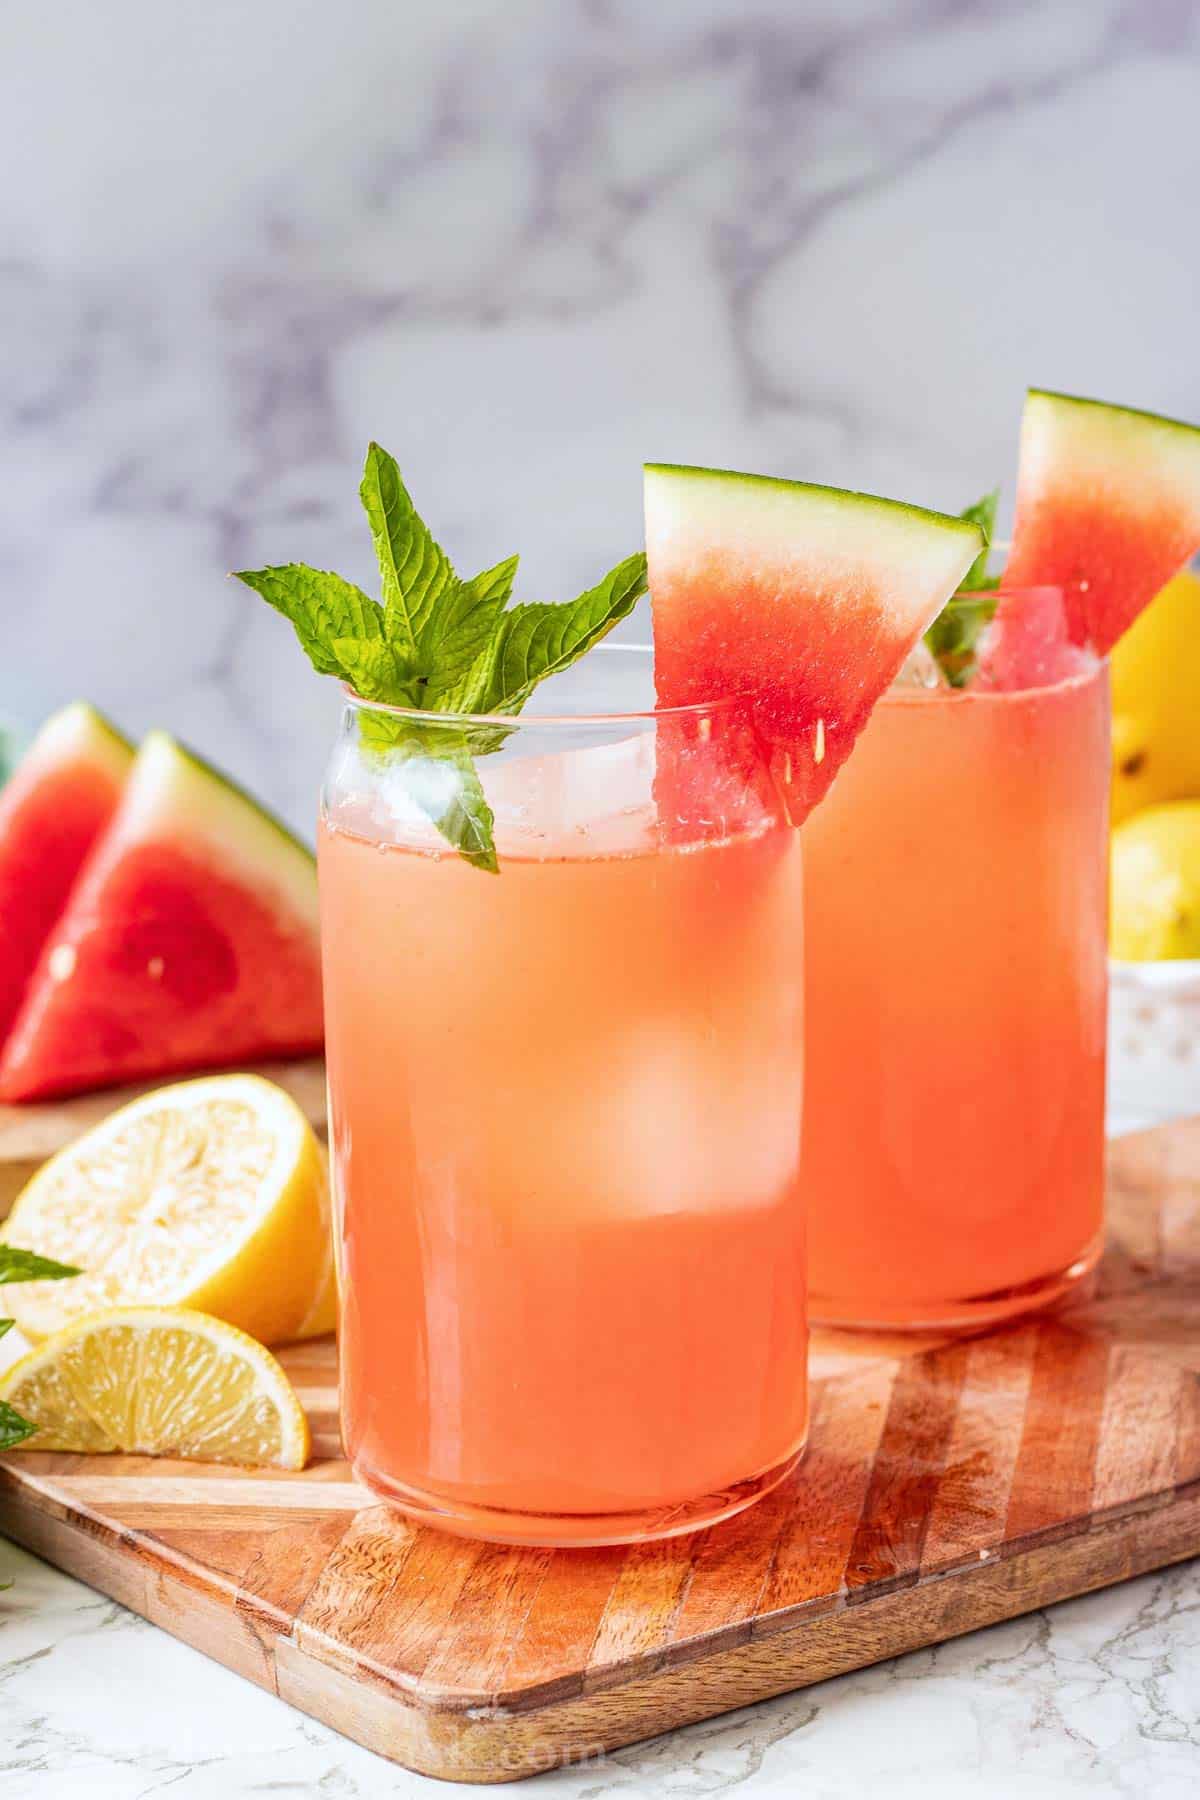 2 glasses of watermelon lemonade with watermelon wedge on rim and mint sprig on wood cutting board.